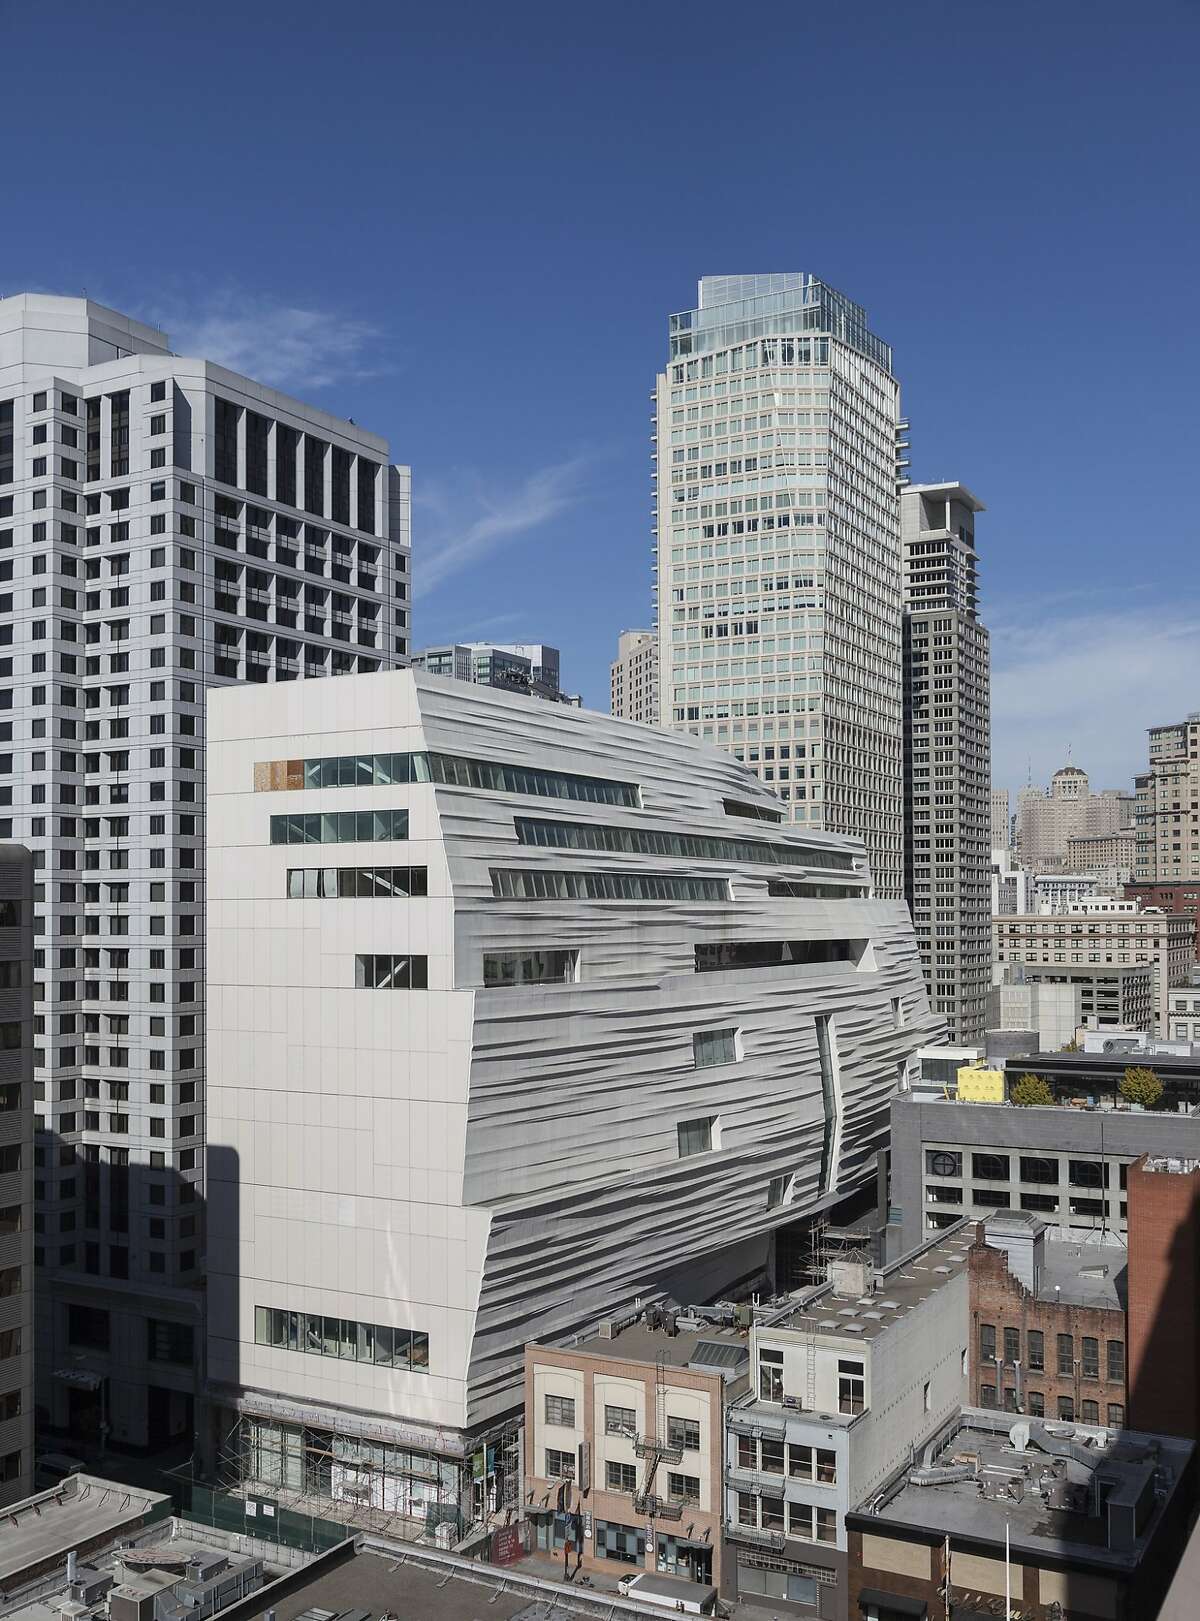 San Francisco Museum of Modern Art: Opens May 14, 2016. SFMOMA’s opening after a three-year redesign and rebuilding is a major international event. The 100-year loan of a great private collection of contemporary art, assembled over 30 years by Gap founders Doris and Donald Fisher, was the impetus for adding space, designed by Snøhetta architects. While they were at it, however, museum leaders took the opportunity to expand in myriad directions, adding 10 stories of new galleries and support areas, including an expansive new Pritzker Center for Photography. A separate Campaign for Art added an additional 3,000 major gifts of art from 200-plus donors. The museum will be free to visitors under 18 years old, and programs for children and families will grow in a new Koret Education Center. http://sfmoma.org